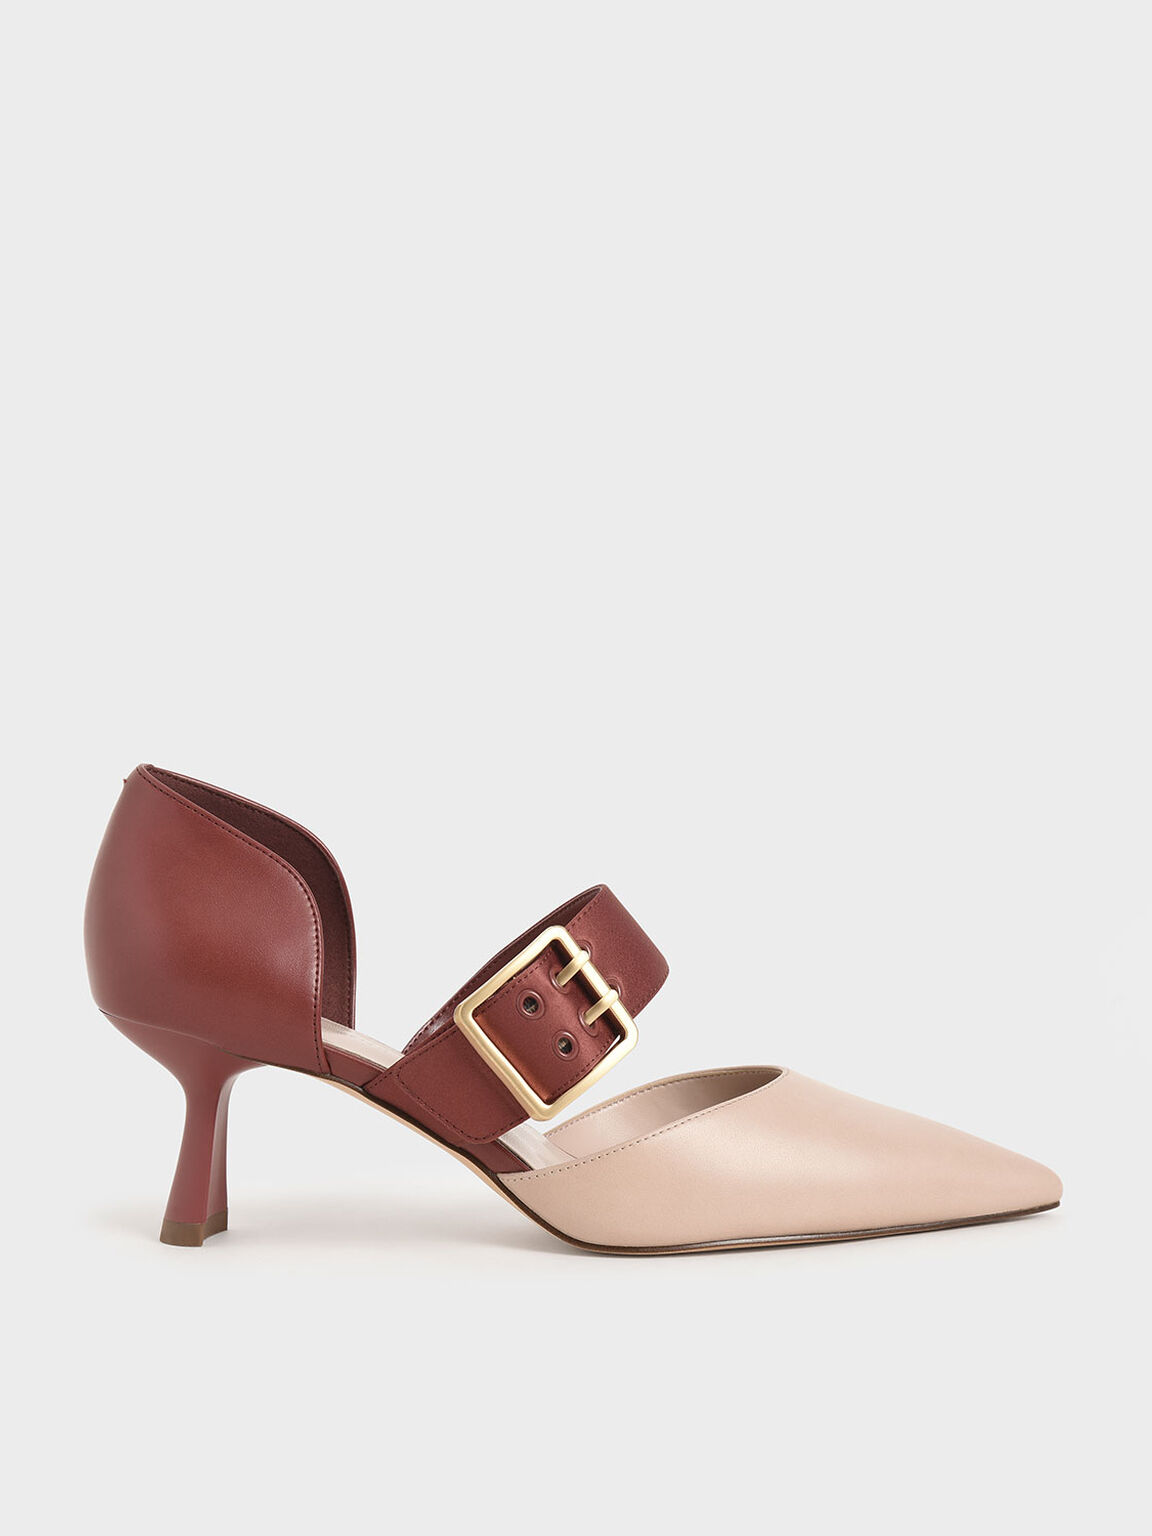 Oversized Buckle Pointed Toe Pumps, Brick, hi-res